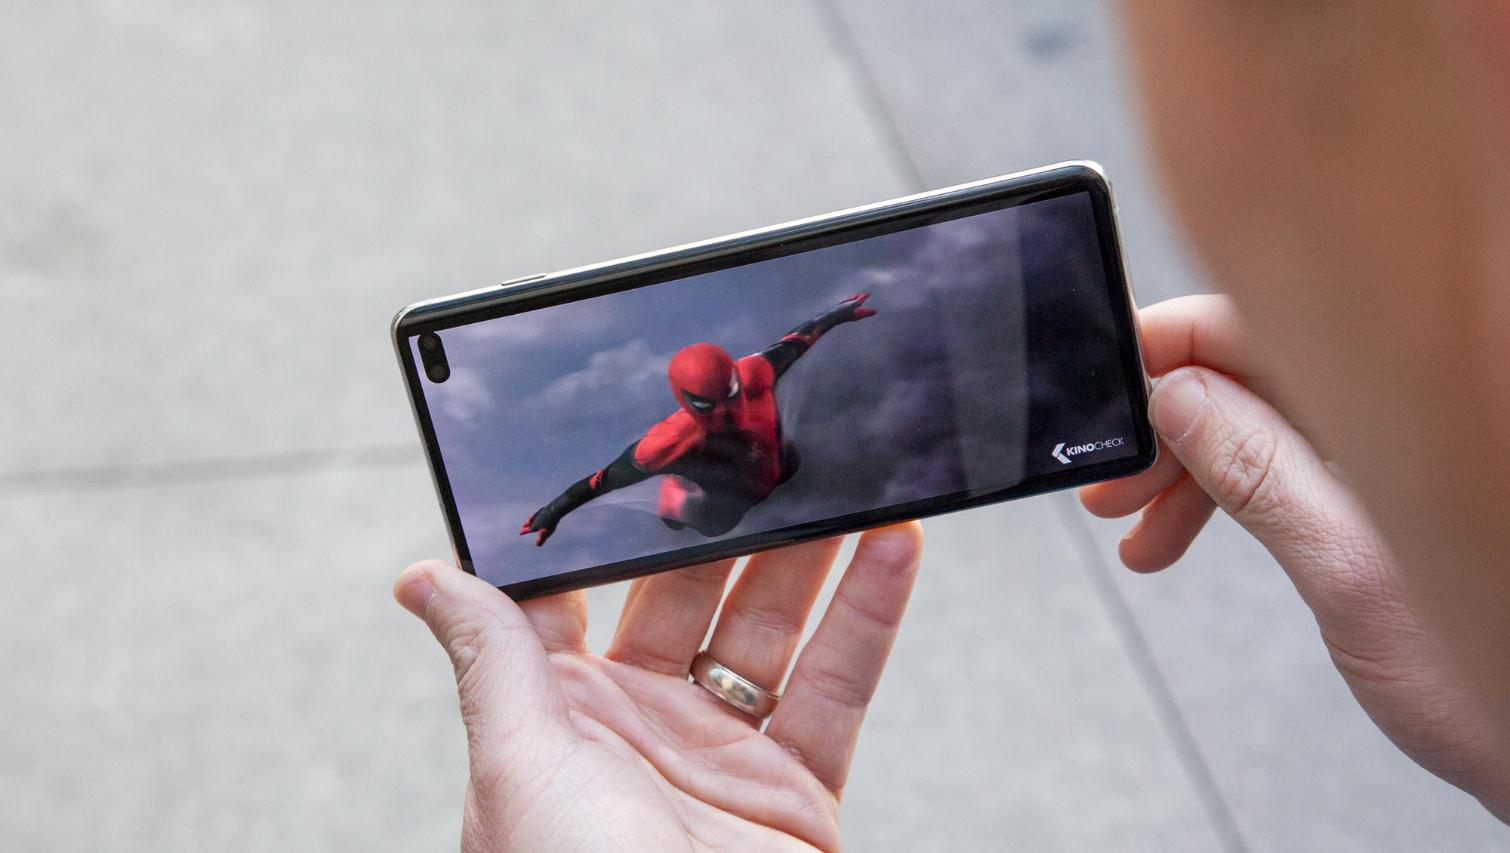 Samsung's Galaxy S10 5G Might Finally Have a Release Date